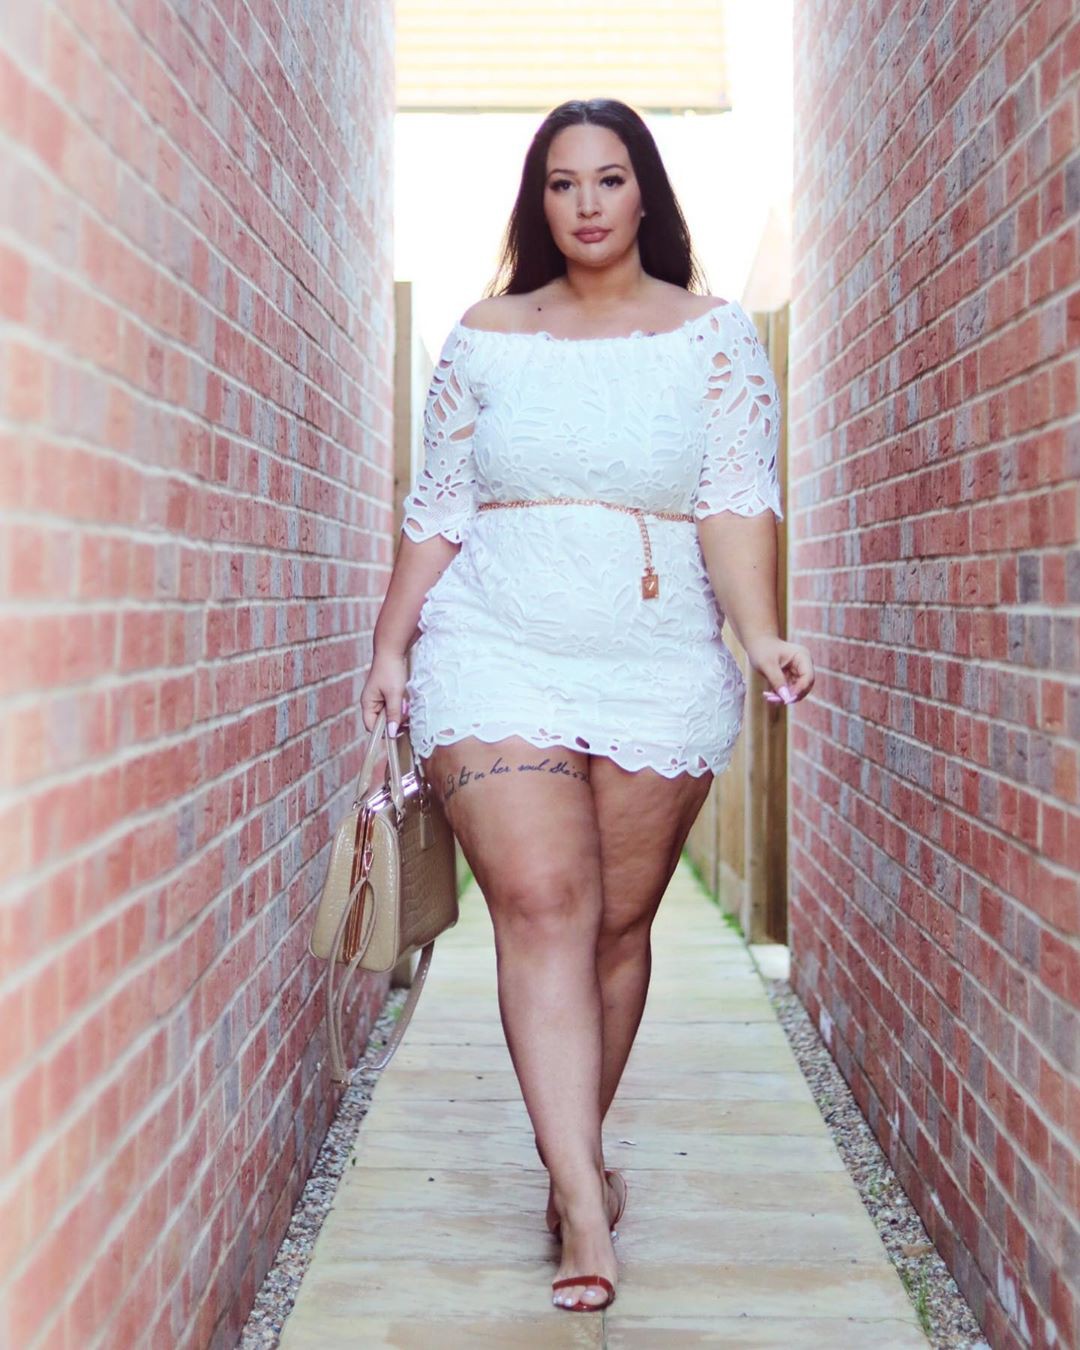 Plus Size beautiful girls pictures, hot legs, Natural Lips | Plus Size